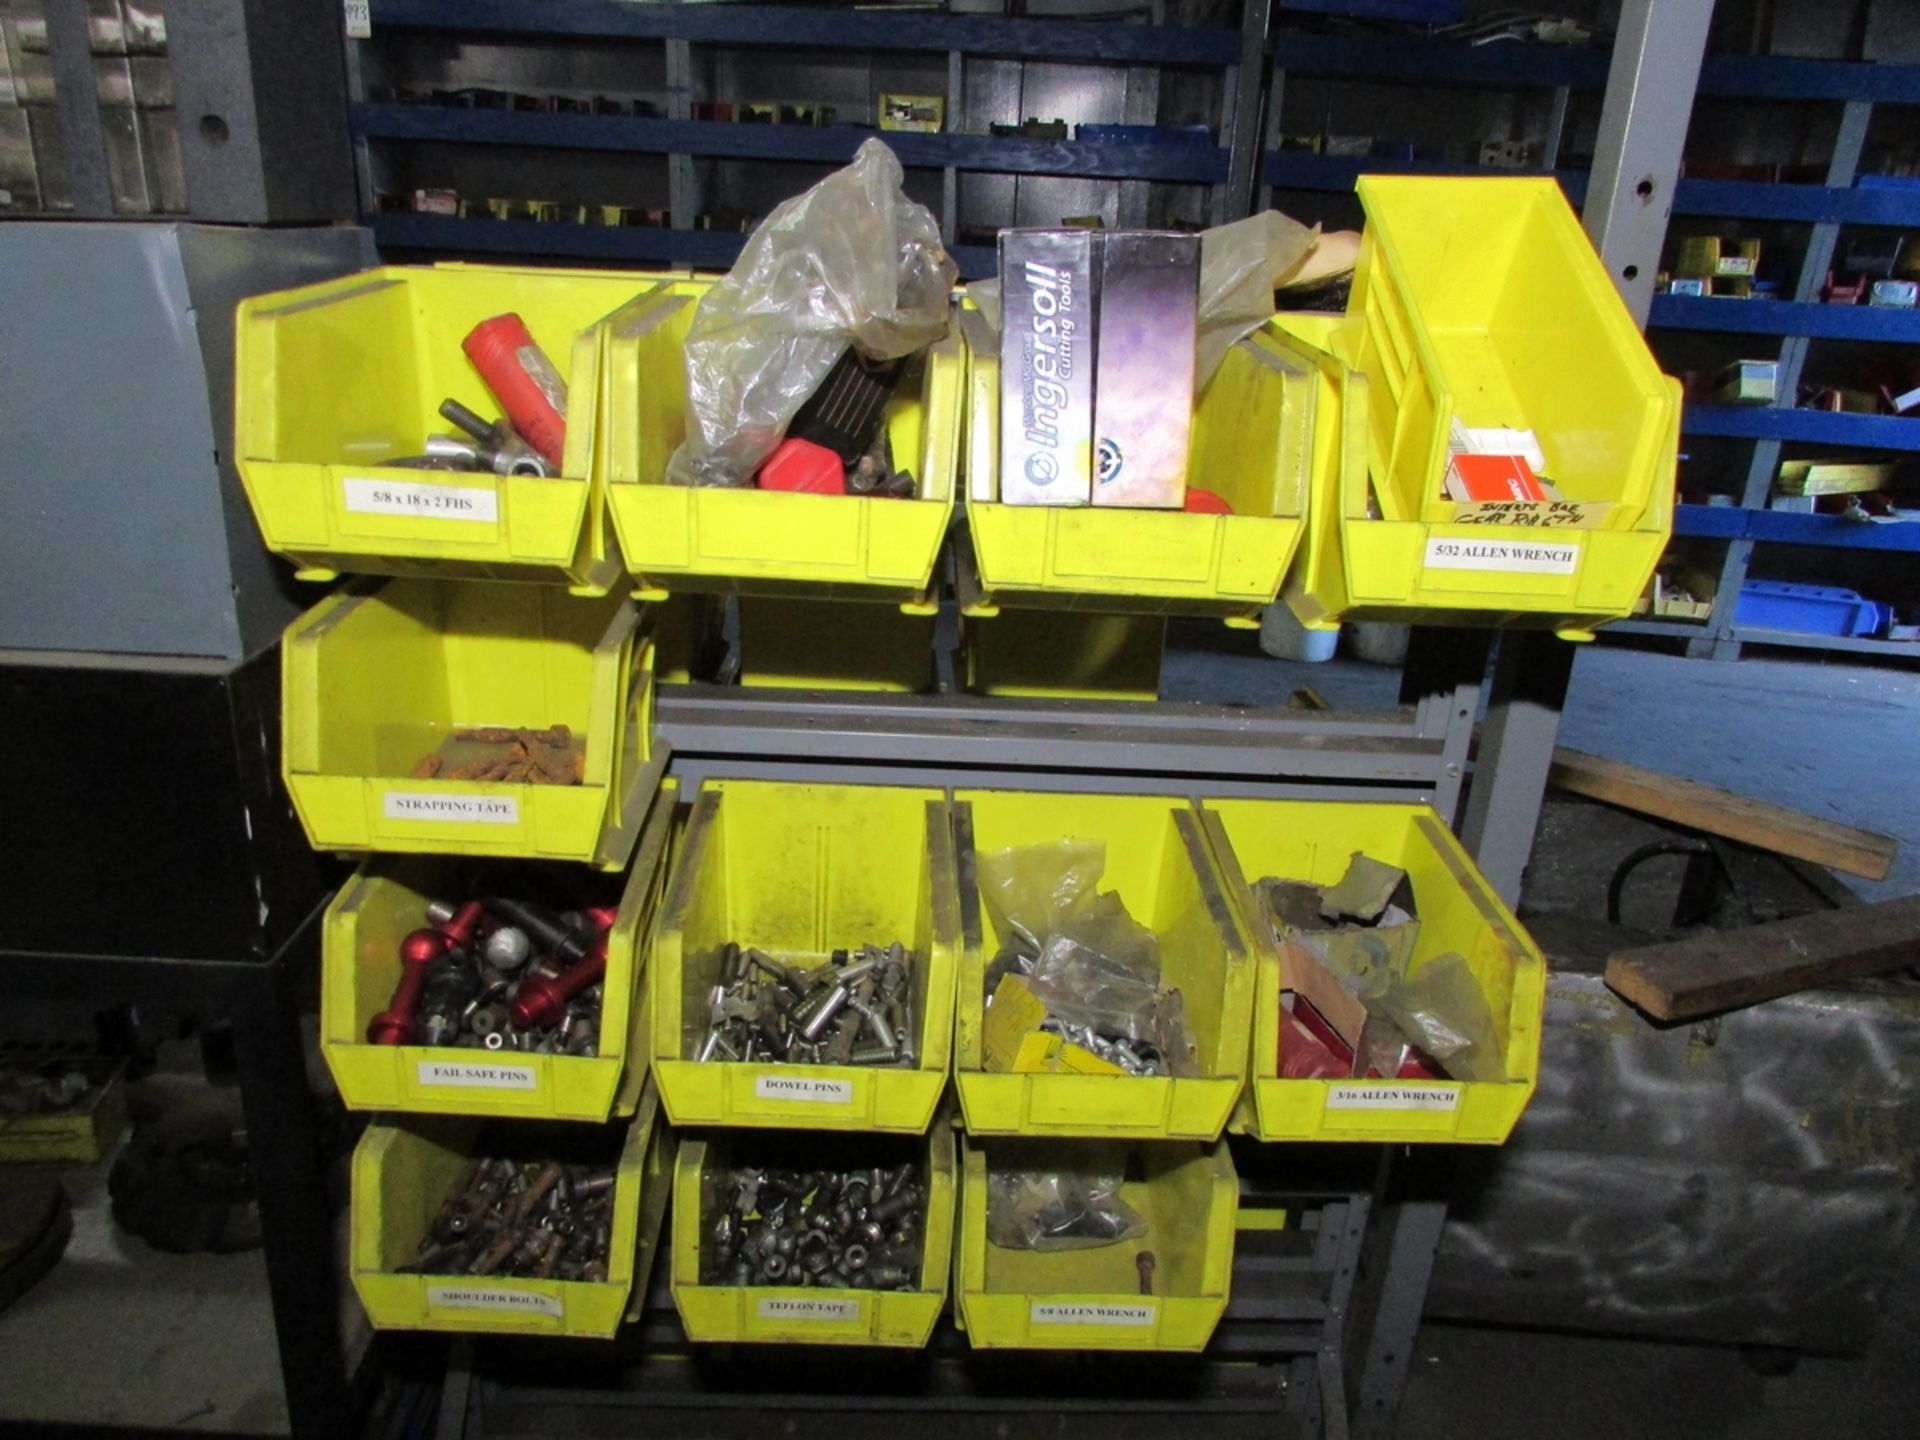 LOT - (10) SHELVING UNITS, W/ MISC. CONTENTS: LARGE ASSORTMENT OF HARDWARE, NUTS, BOLTS, FITTINGS, - Image 17 of 17